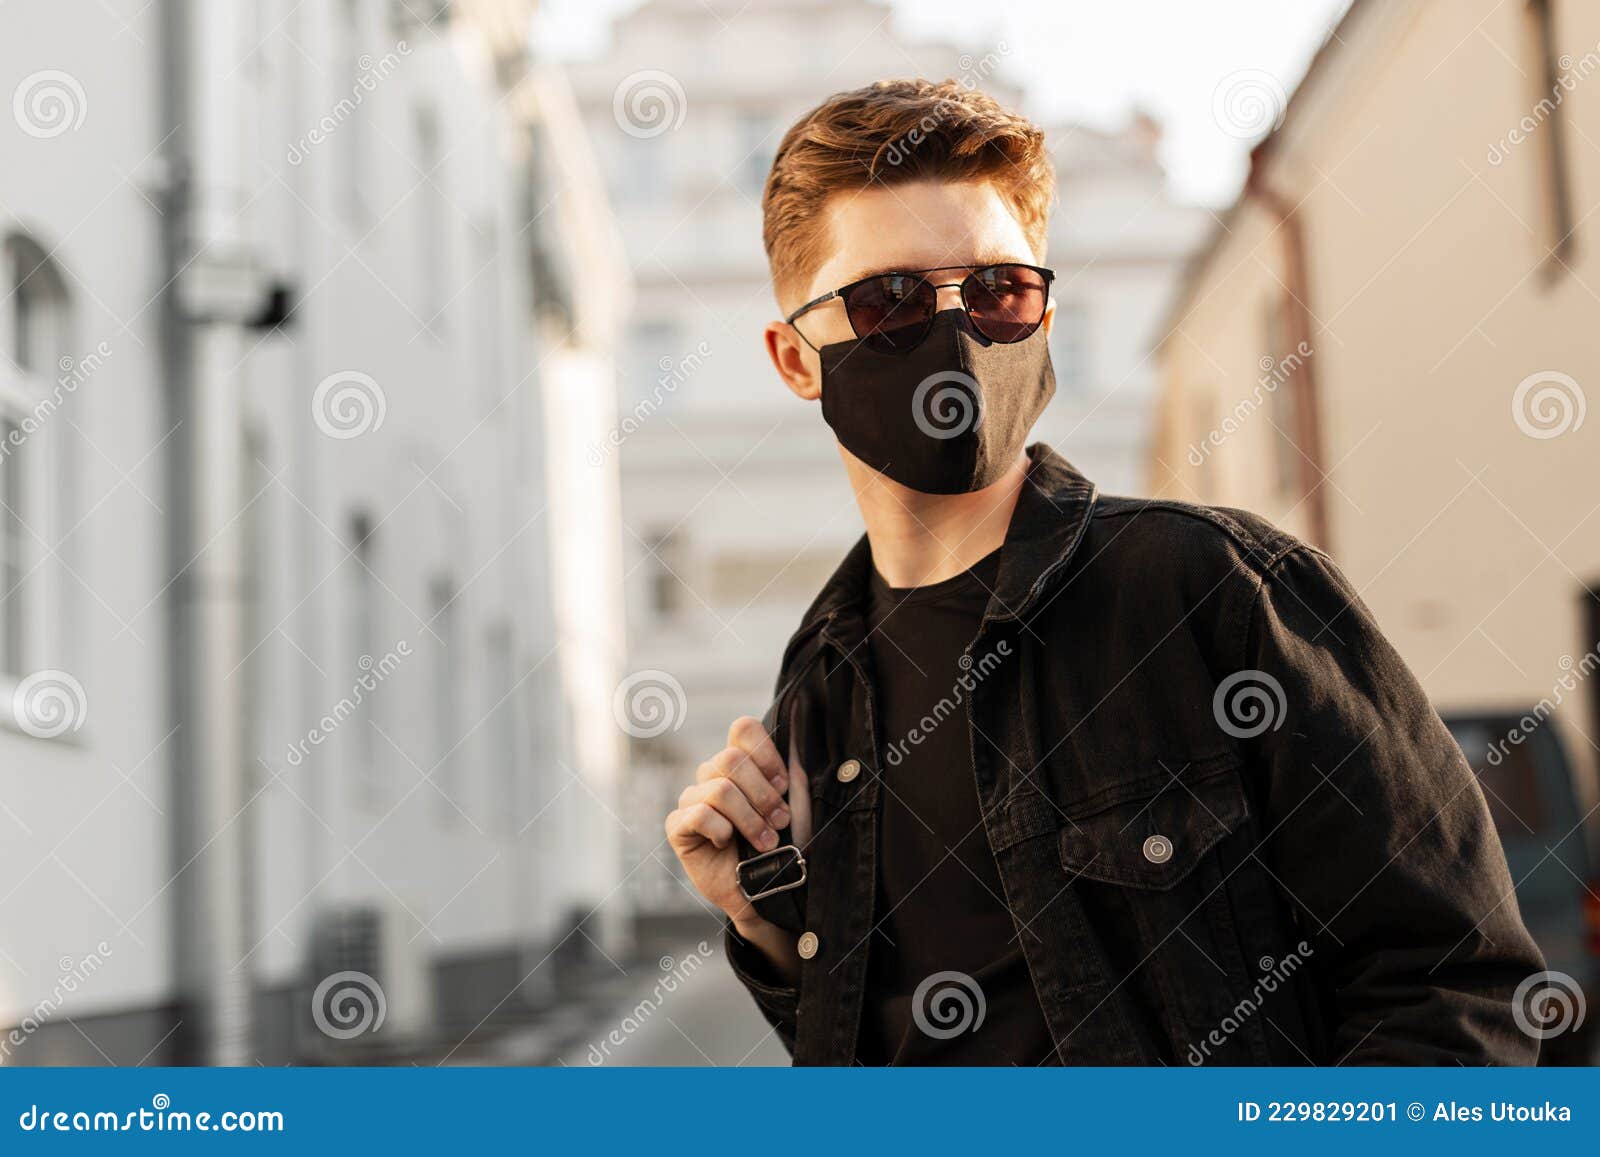 Young Handsome Fashion Man in Sunglasses with Backpack in Face